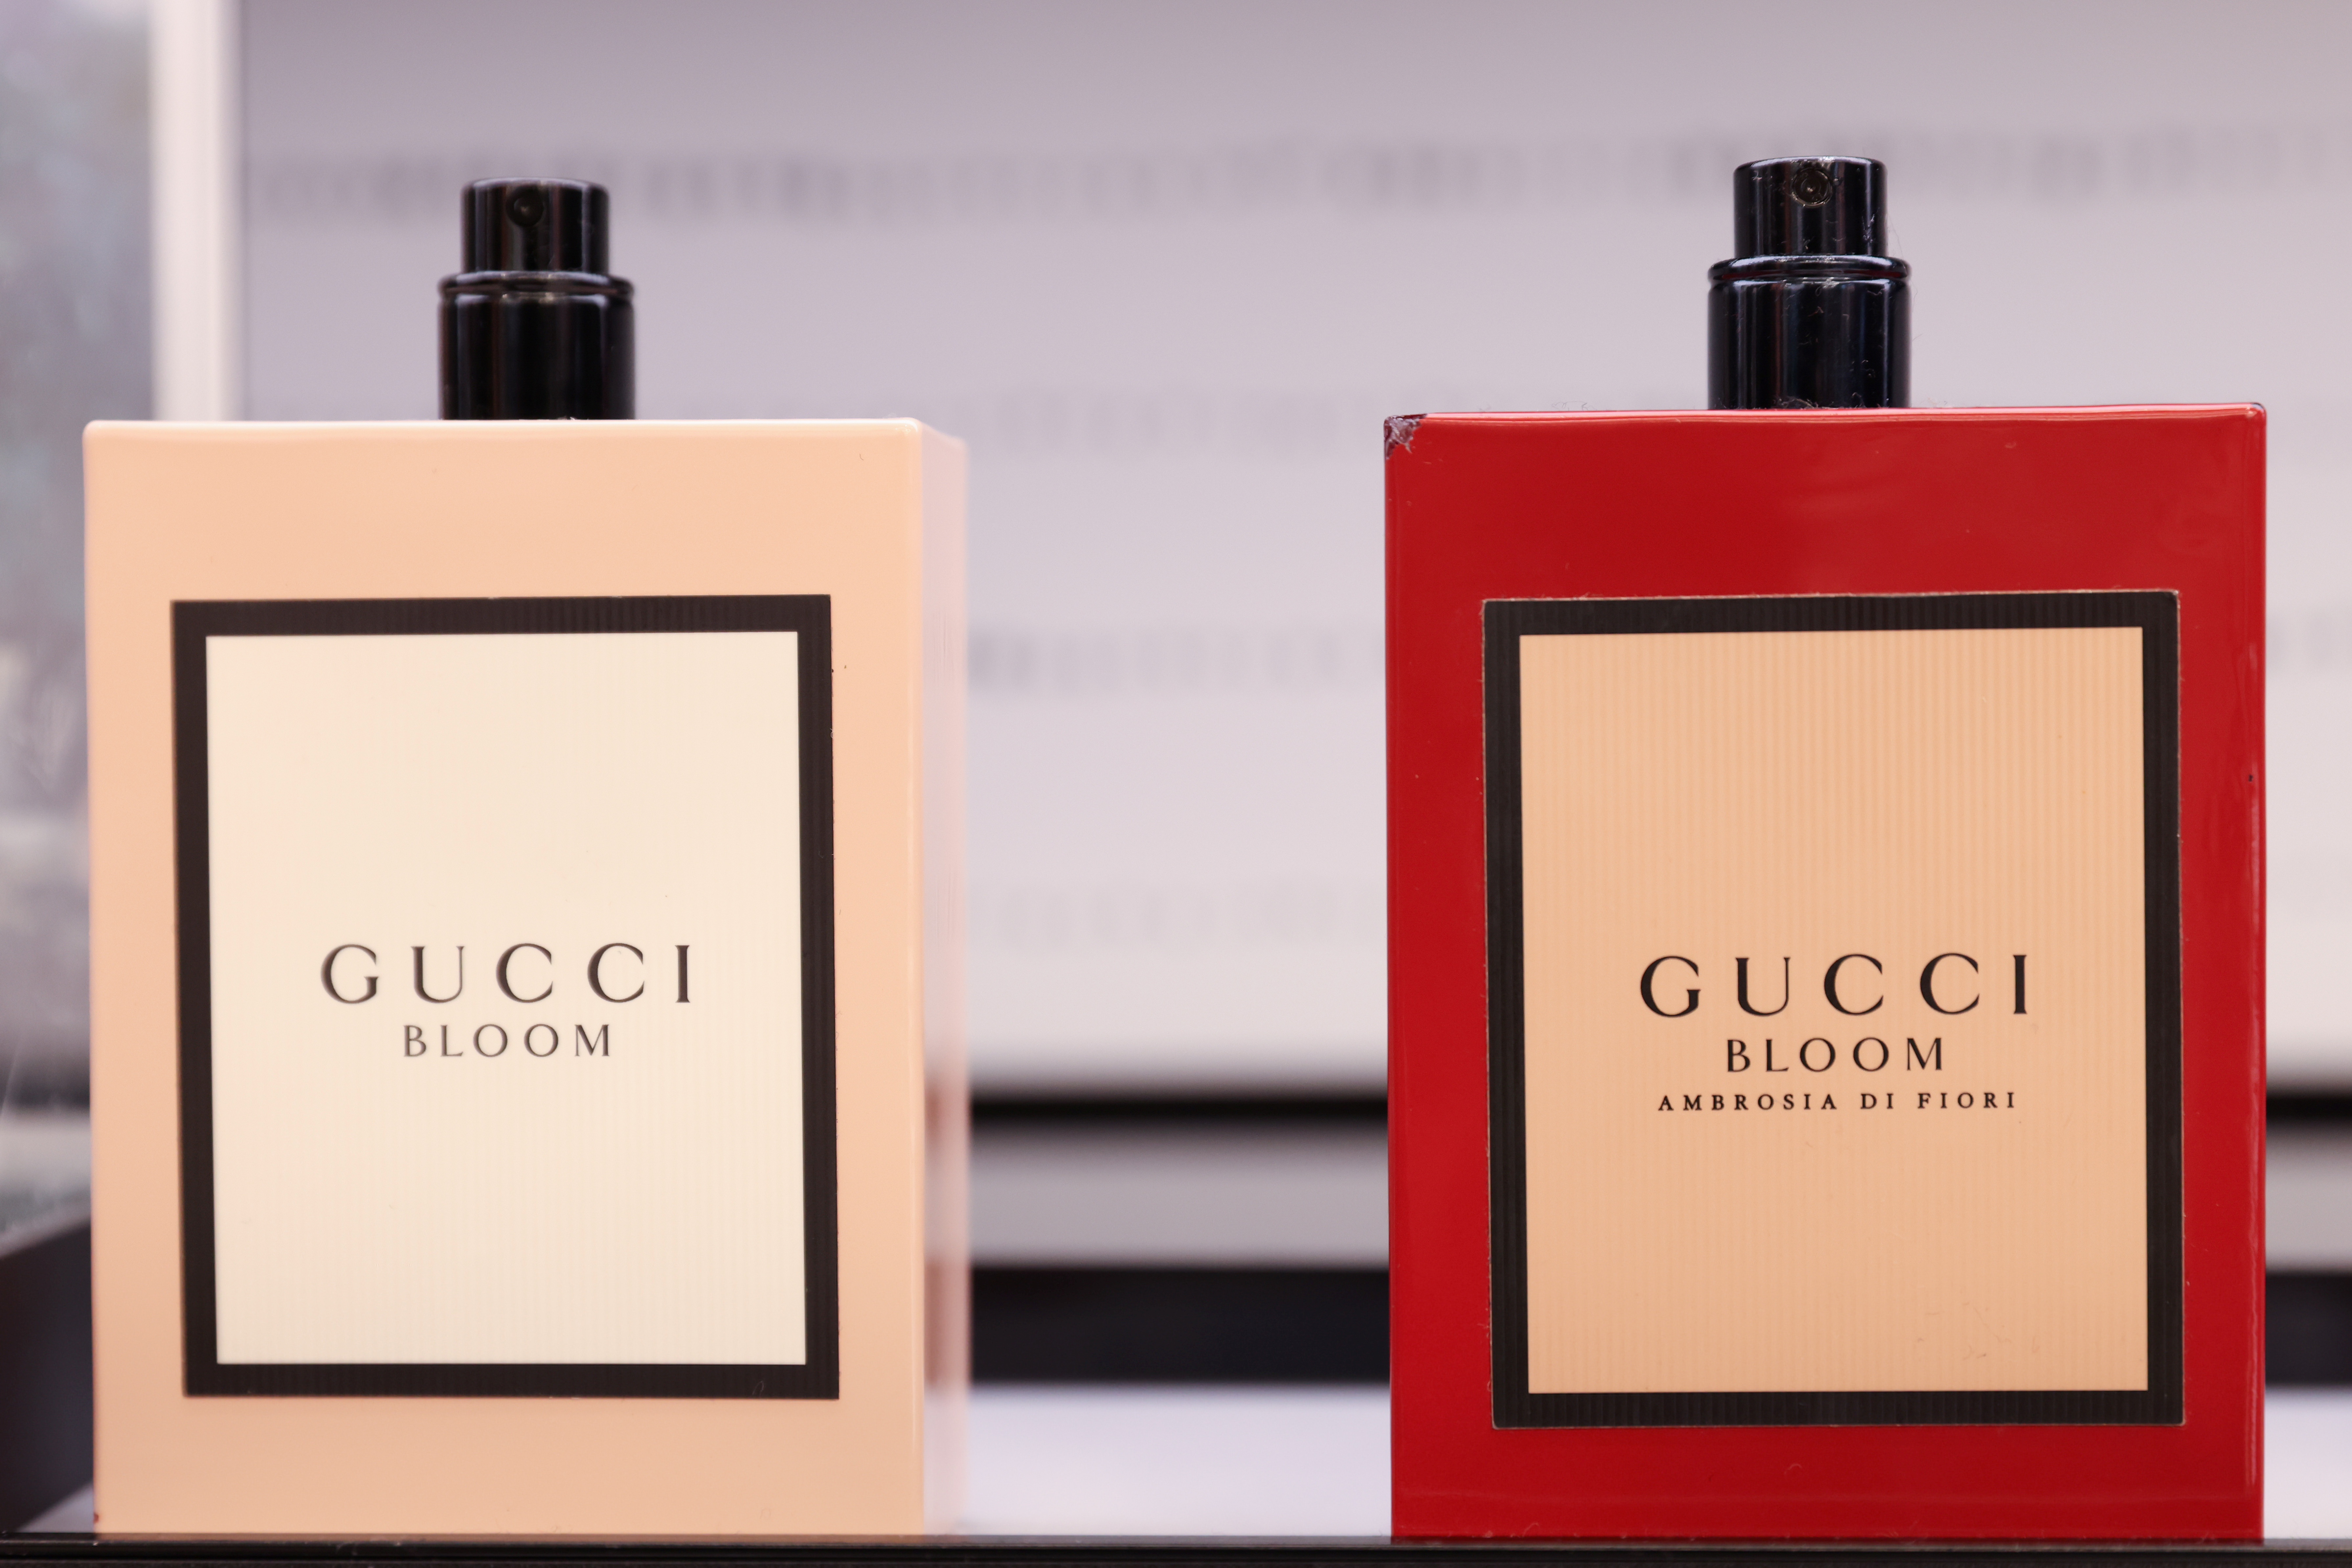 Gucci fragrances, owned by Coty Inc., are seen for sale in Manhattan, New York City